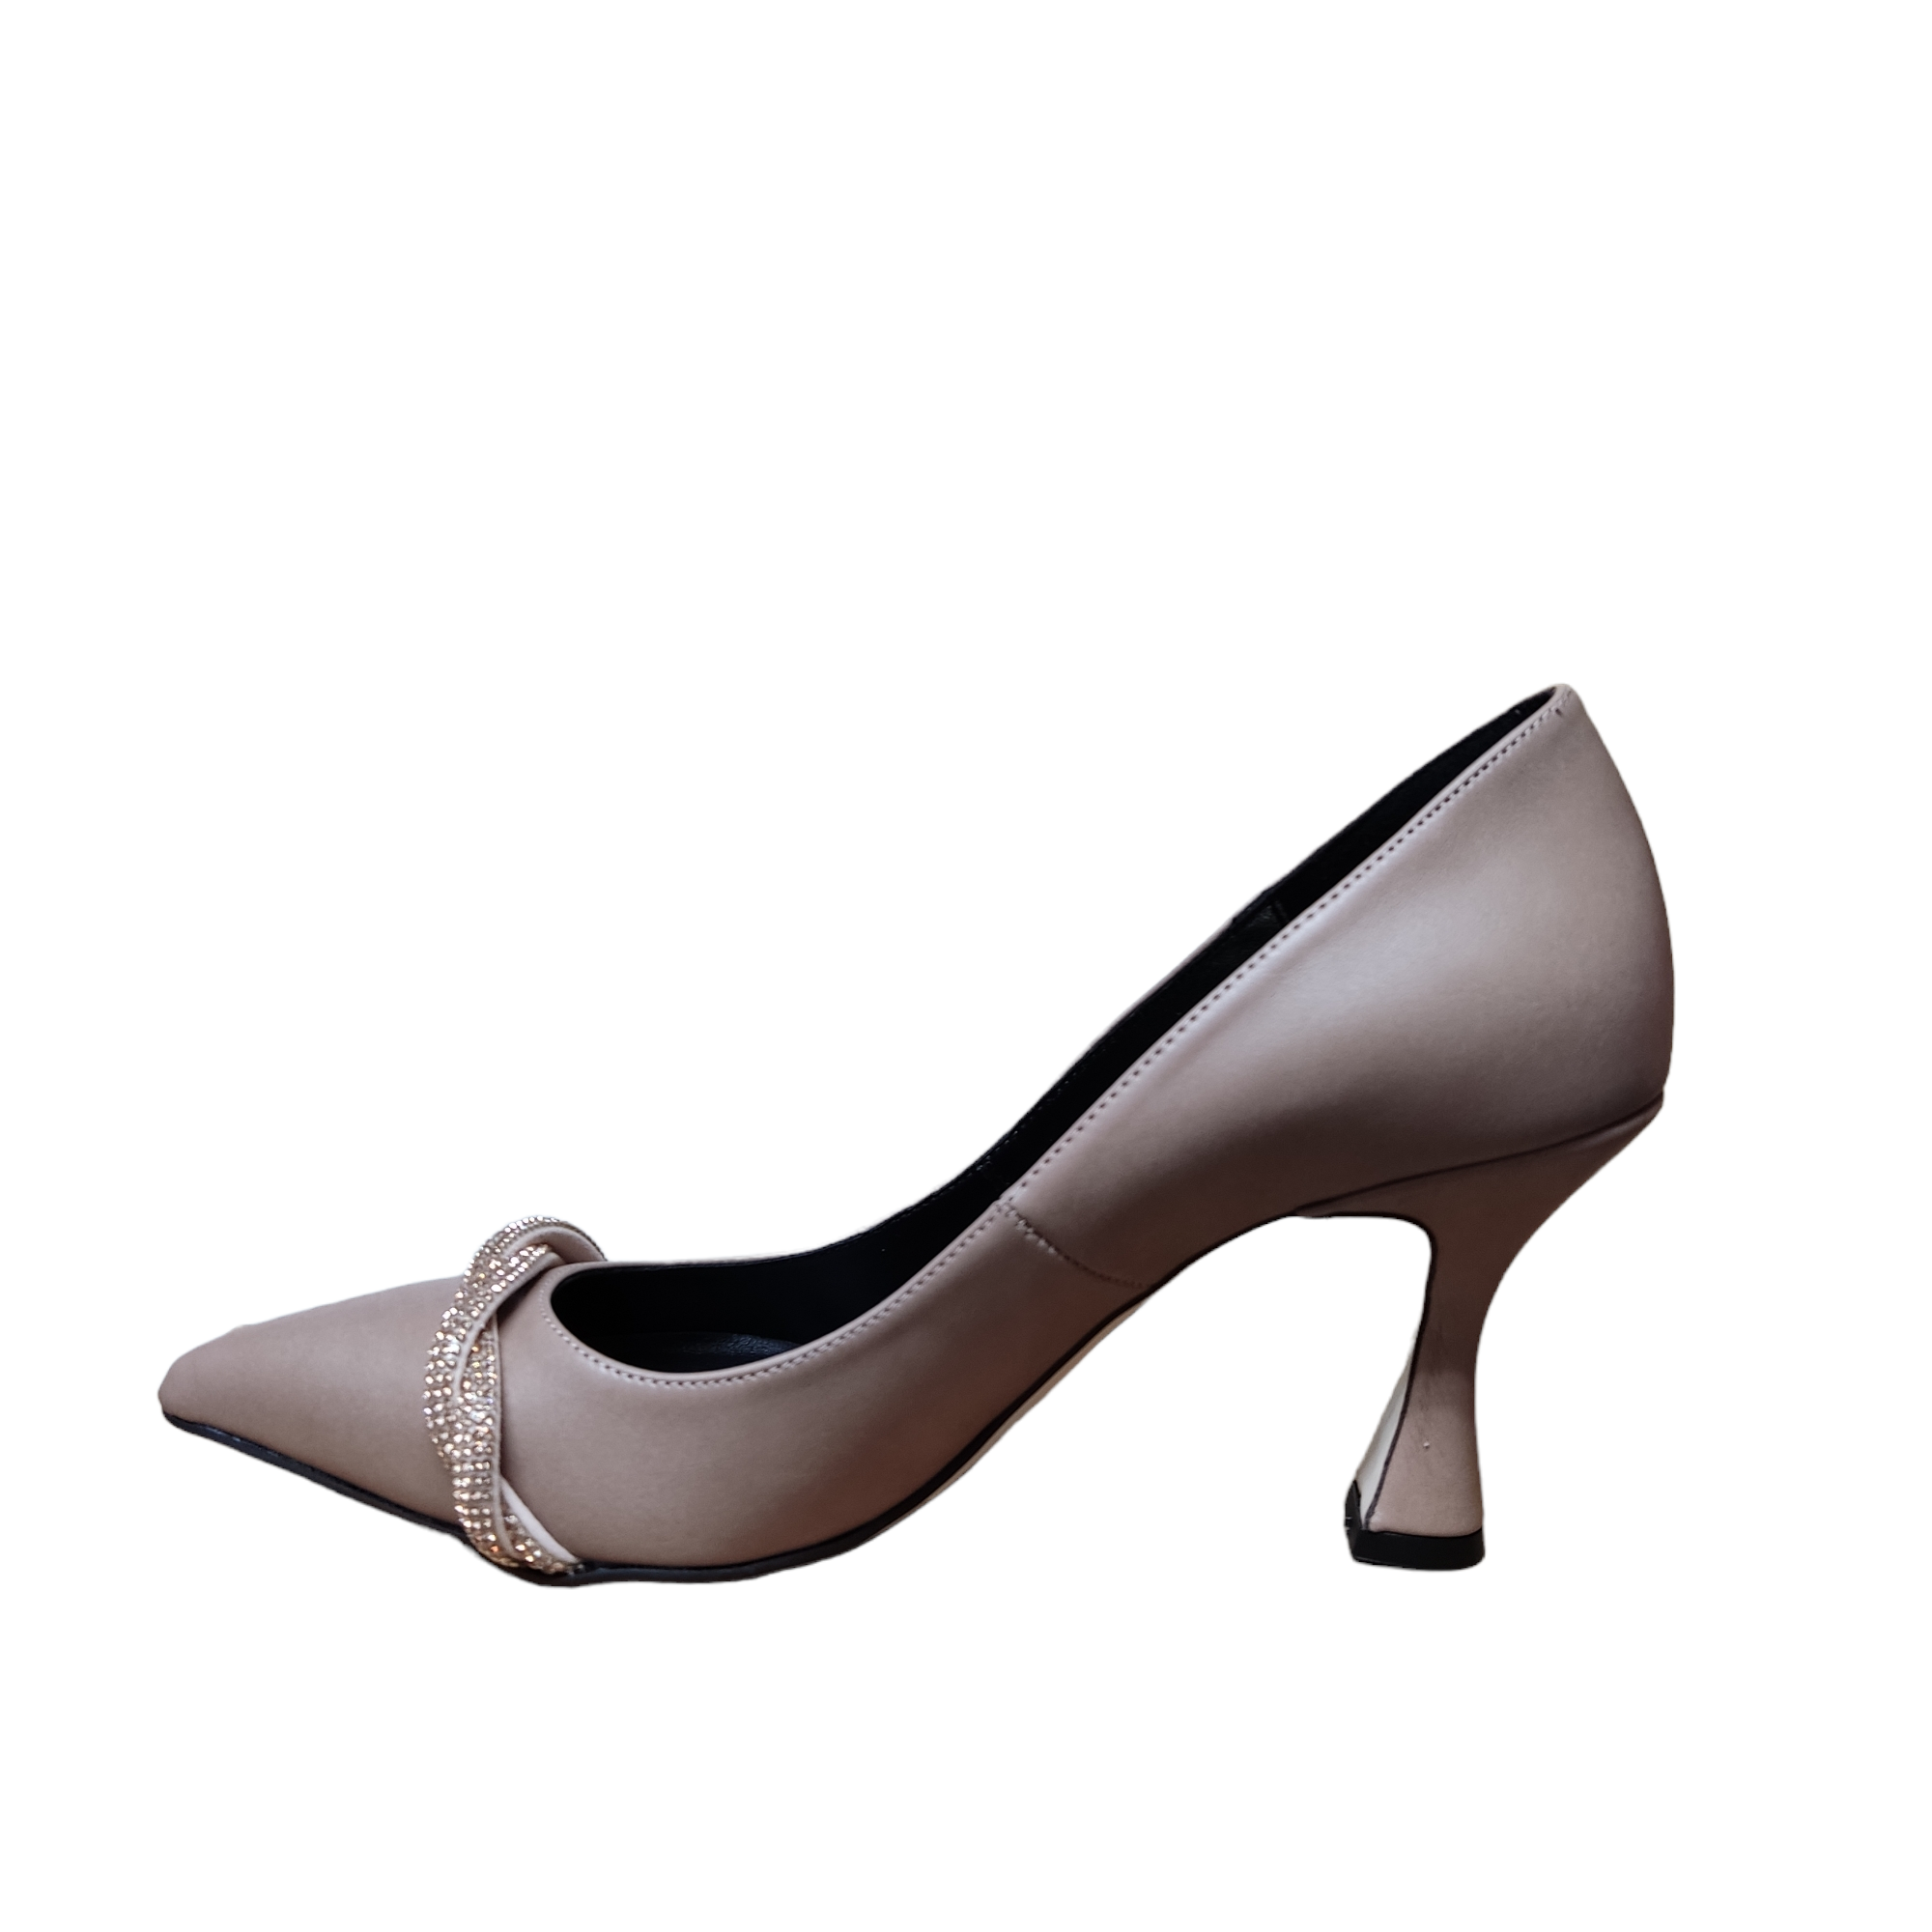 LEATHER PUMPS WITH STRASS 84209/1 ELLEN COLLECTION NUDE